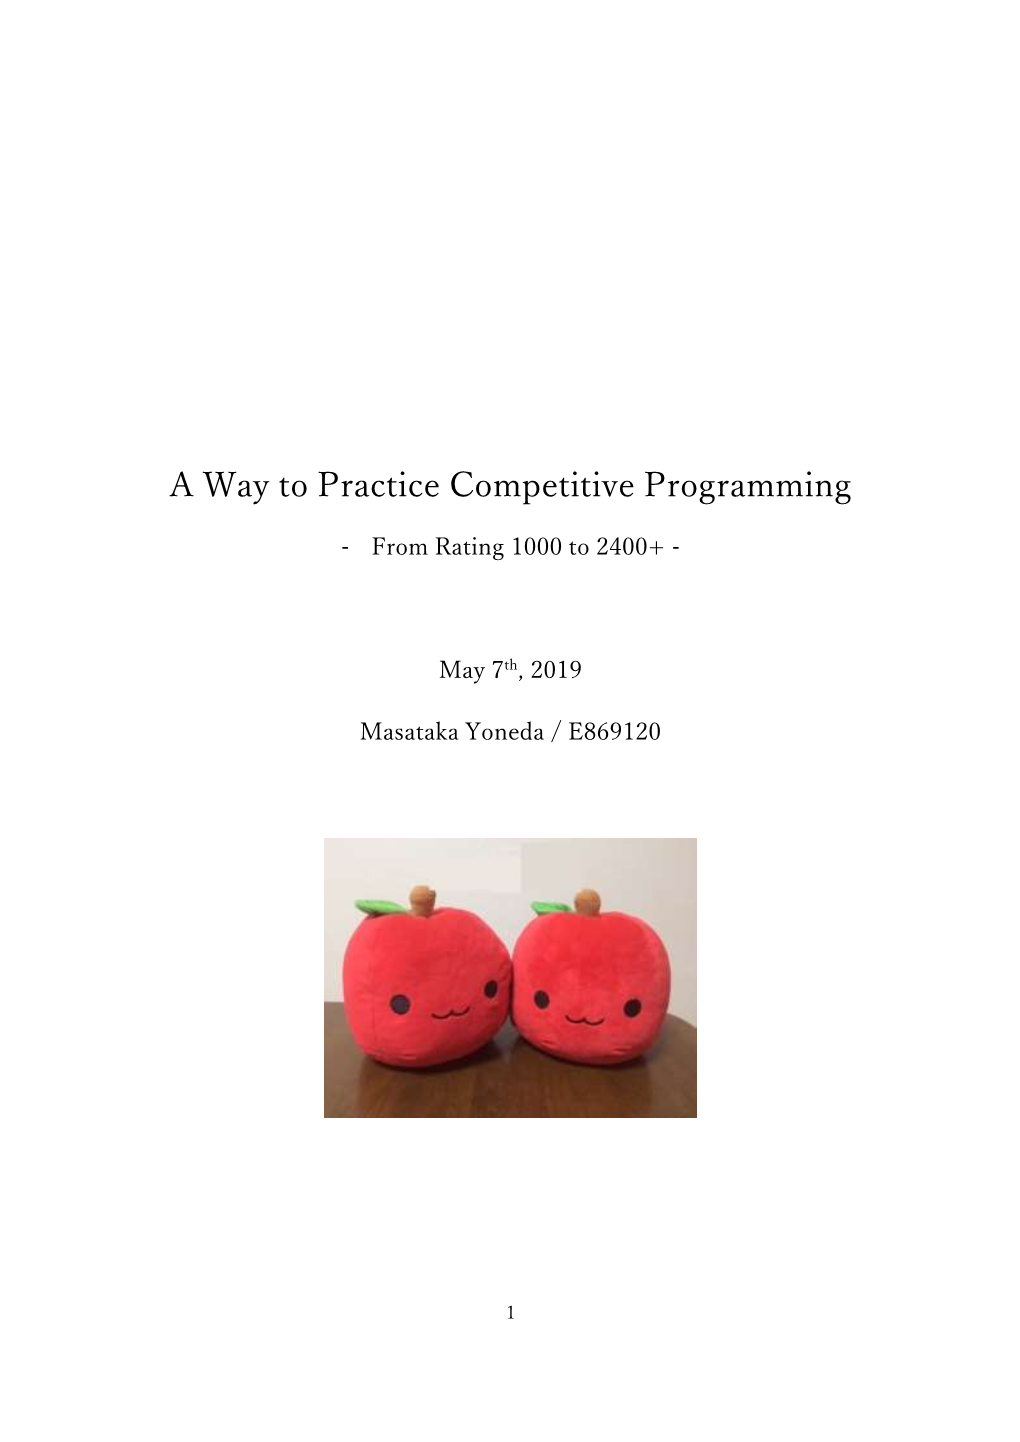 A Way to Practice Competitive Programming